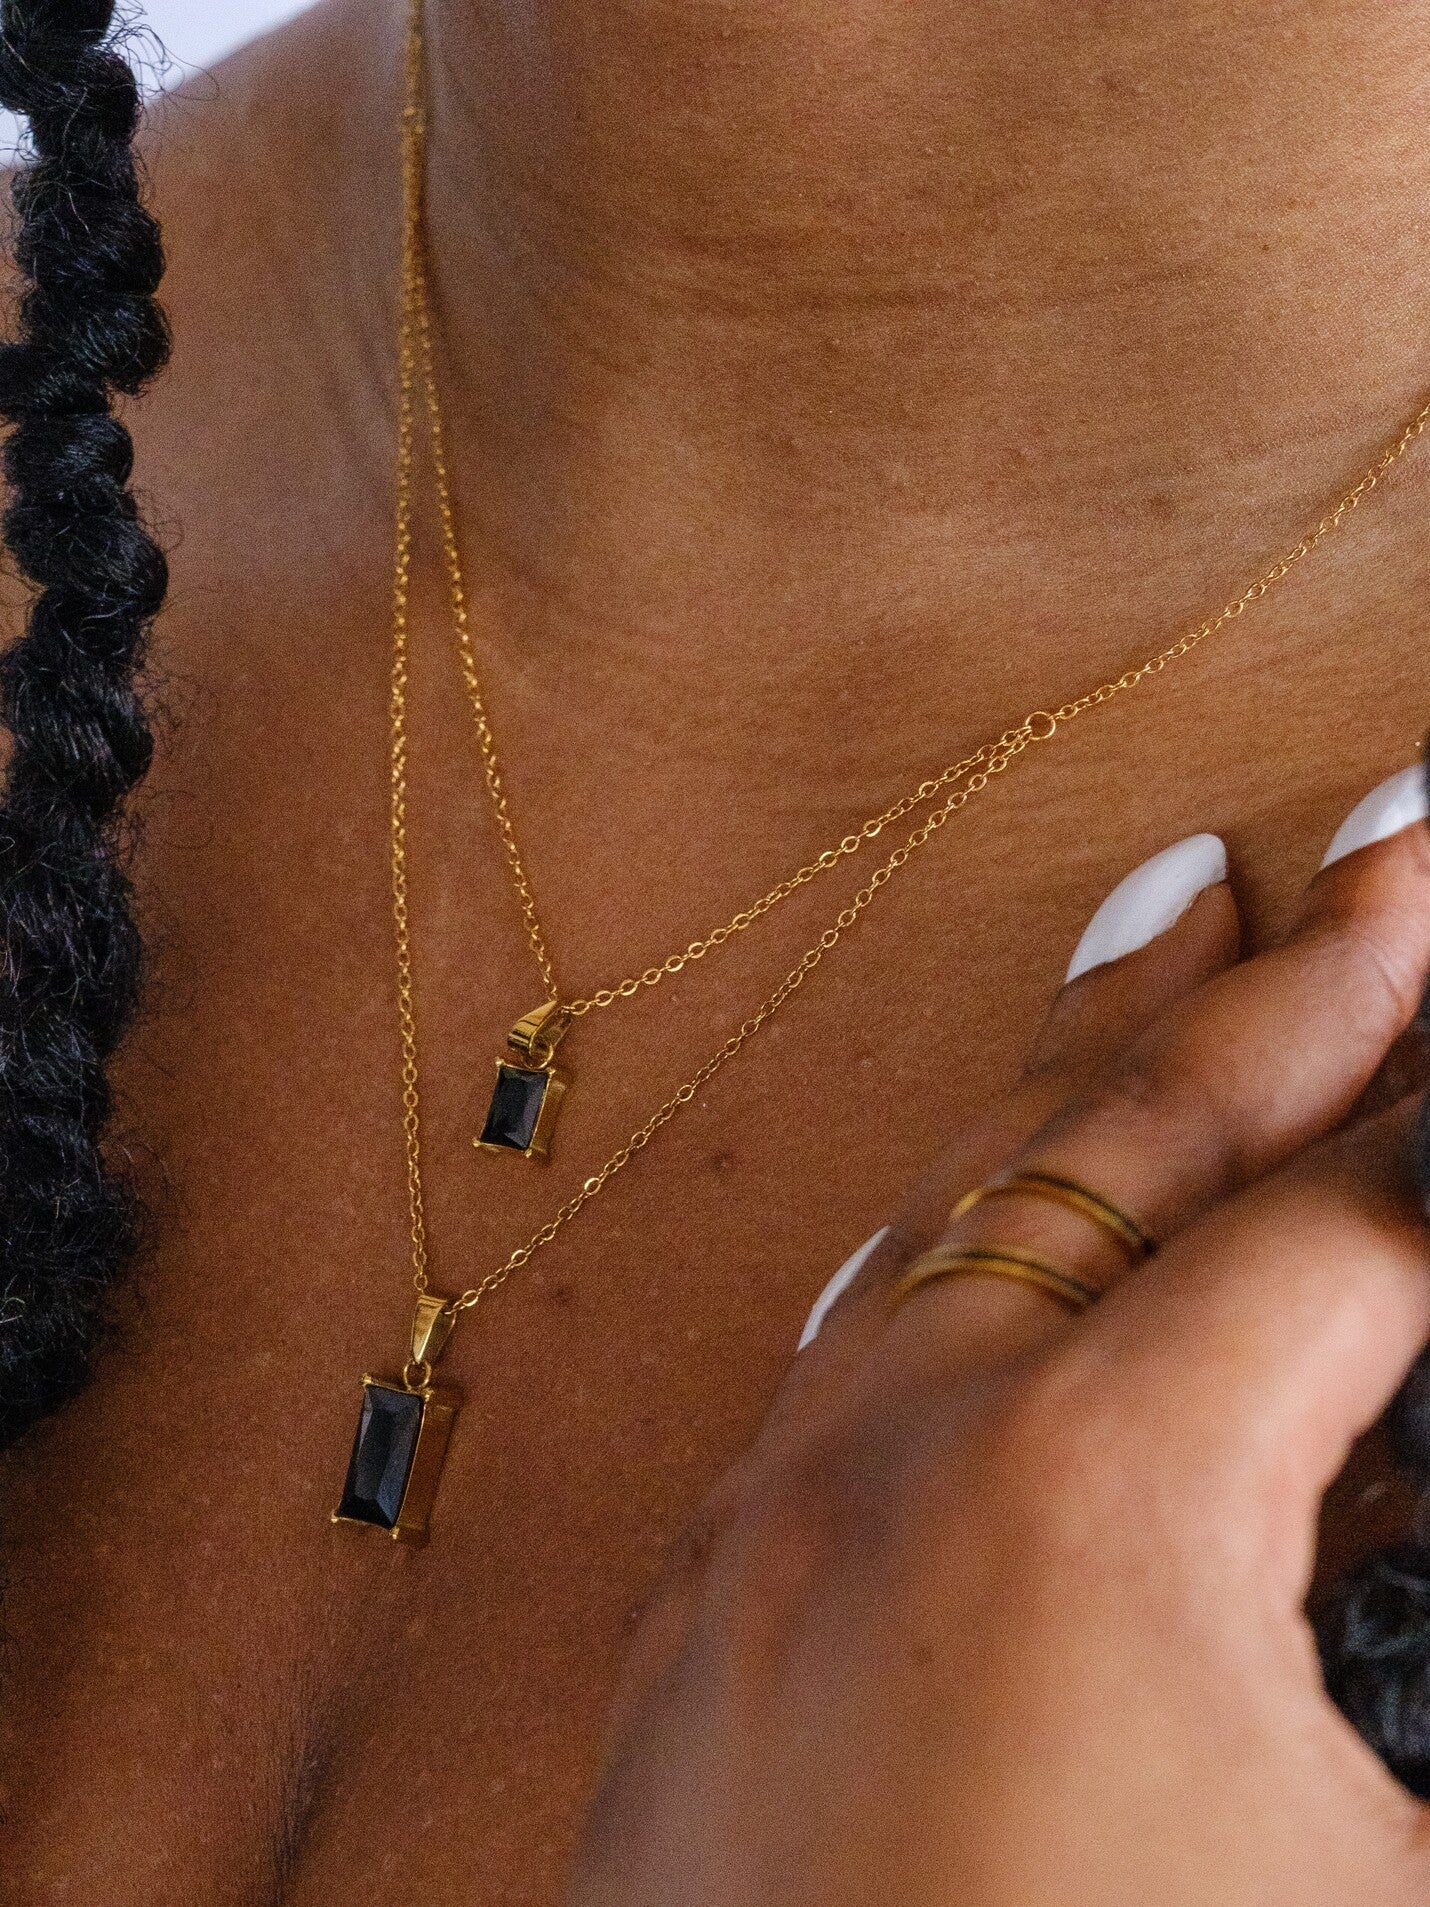 Woman's neck wearing a double layered necklace with two black rectangle jewel pendants